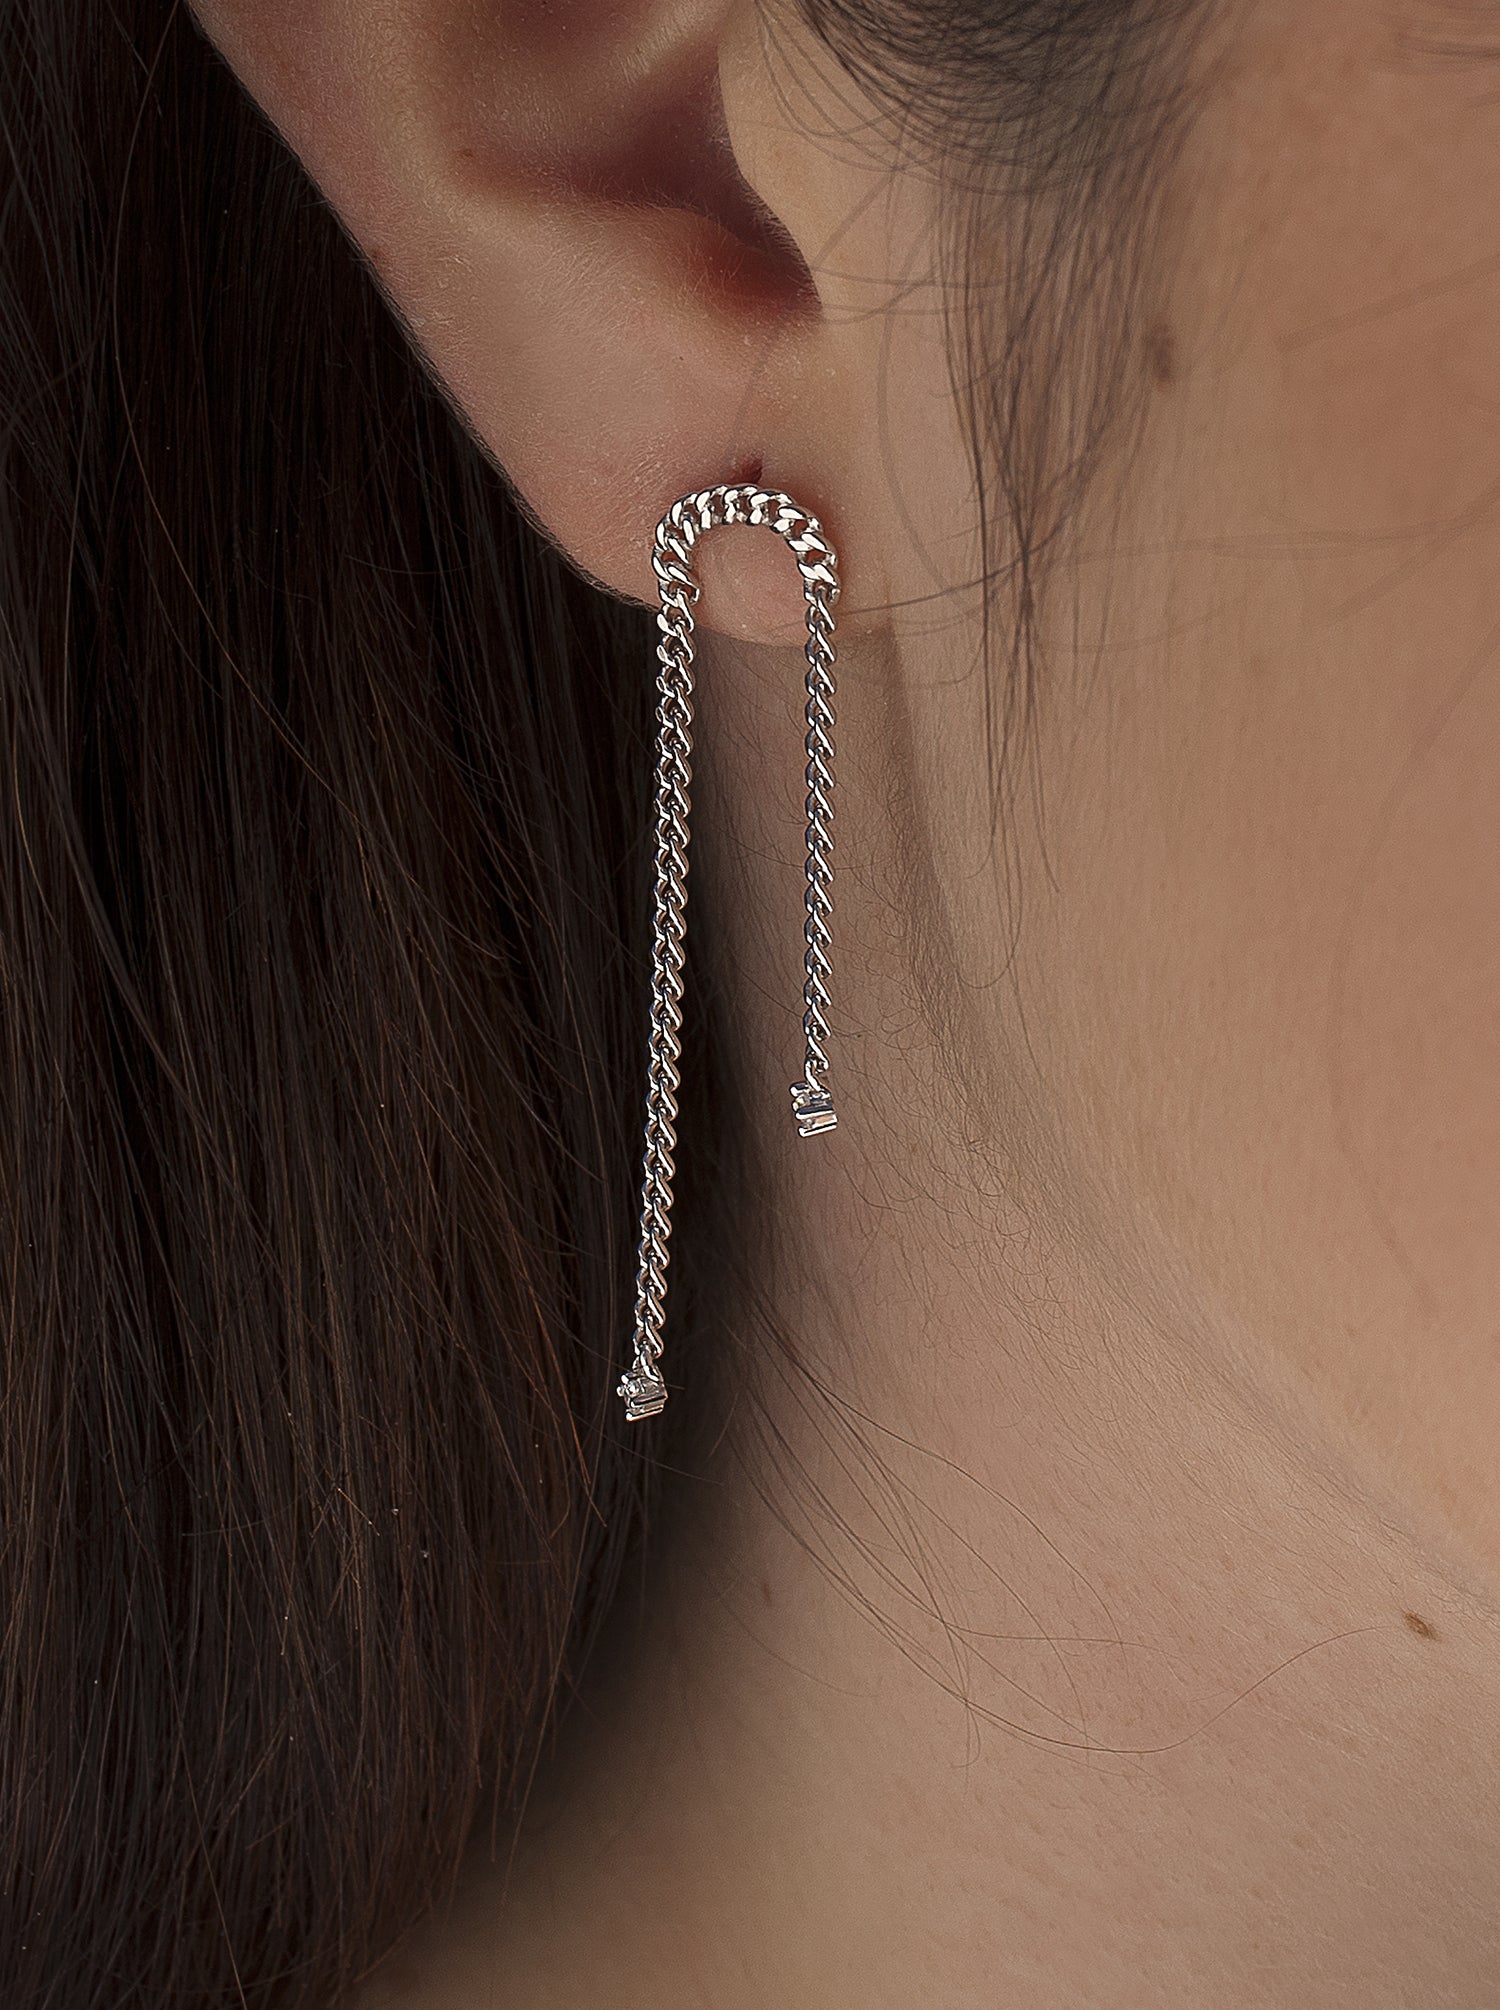 Long silver chain style earrings with zirconia details